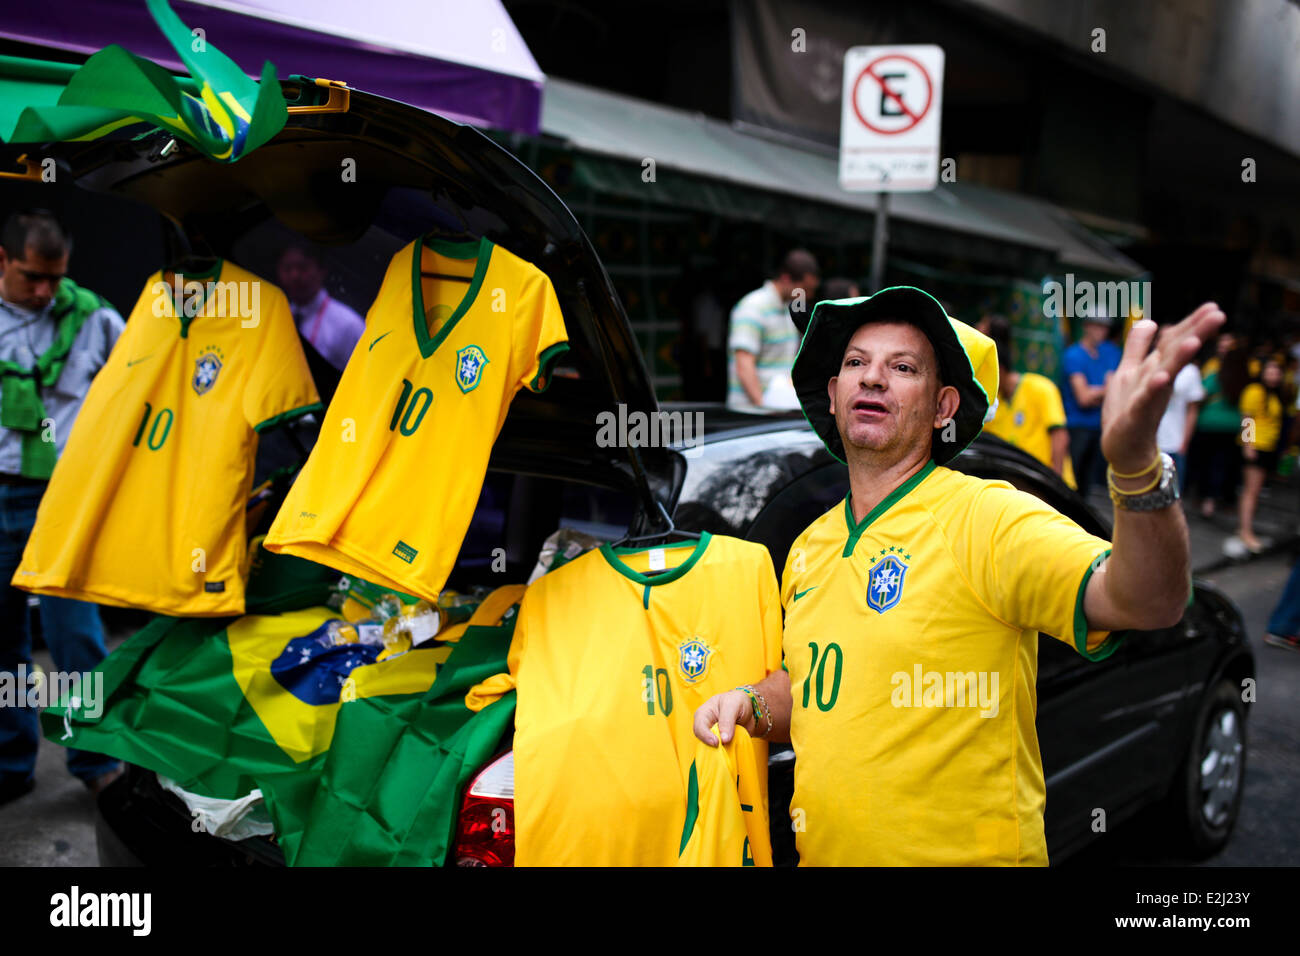 Sao Paolo, Brazil. 17th June, 2014. A Brazilian cheers for his team during the game between Brazil and Mexico that ended without goals in a street in Sao Paulo, Brazil on June 17, 2014. (Photo by Tiago Mazza Chiaravalloti/NurPhoto) © Tiago Mazza Chiaravalloti/NurPhoto/ZUMAPRESS.com/Alamy Live News Stock Photo